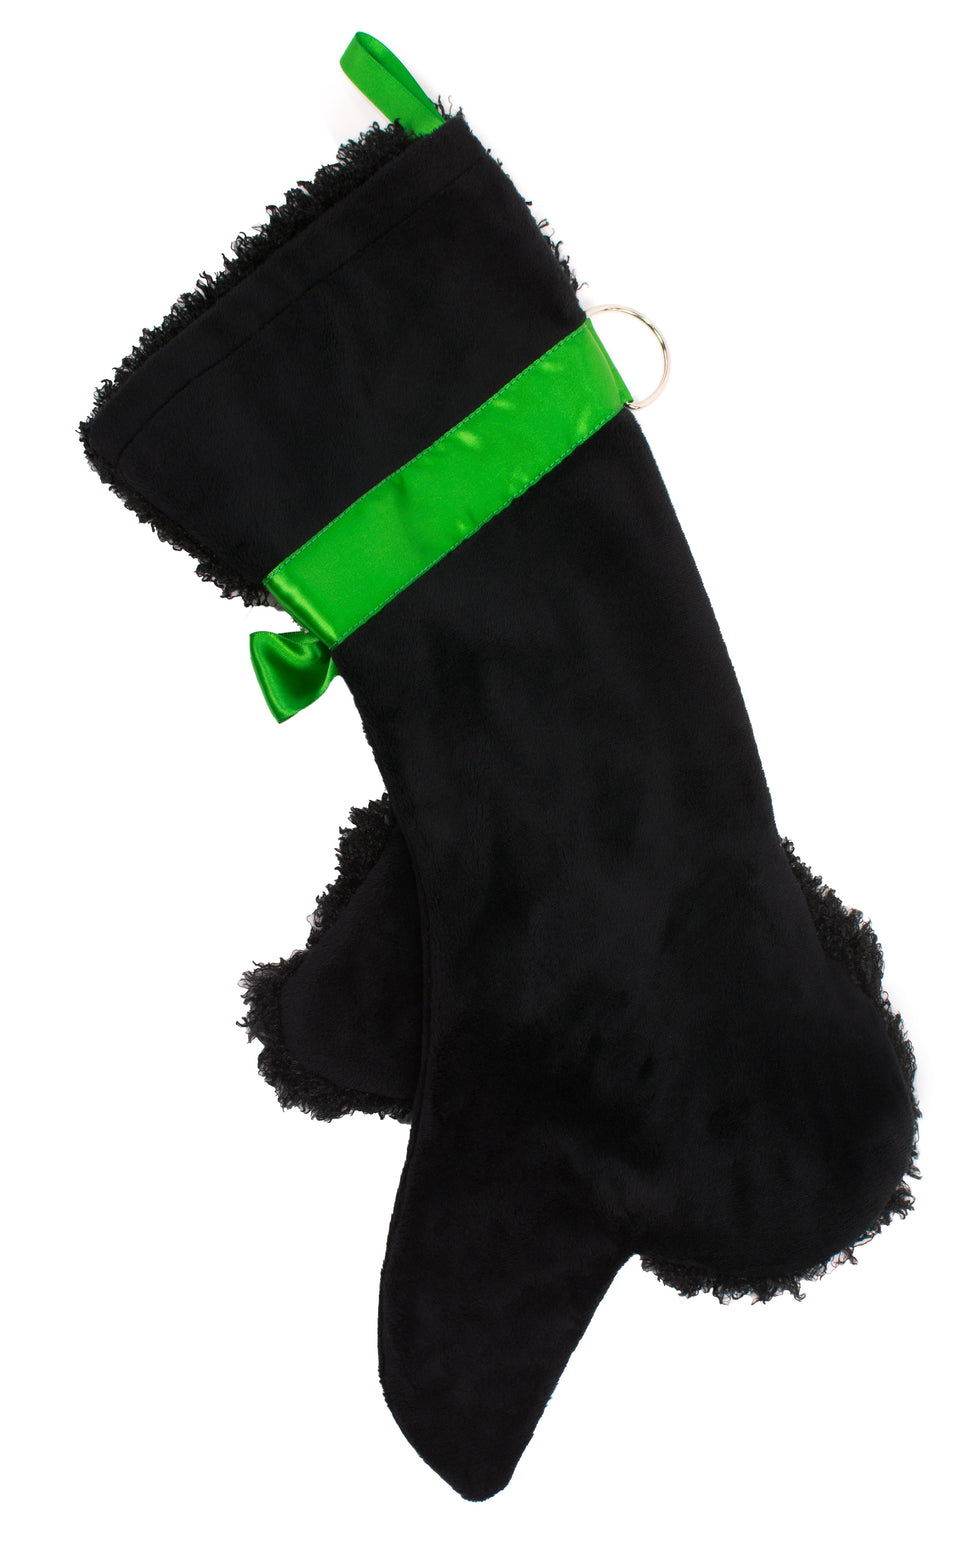 This Black Poodle shaped dog Christmas stocking is the perfect gift for stuffing toys and treats into to spoil your fur baby for Christmas, or whatever holiday you celebrate!